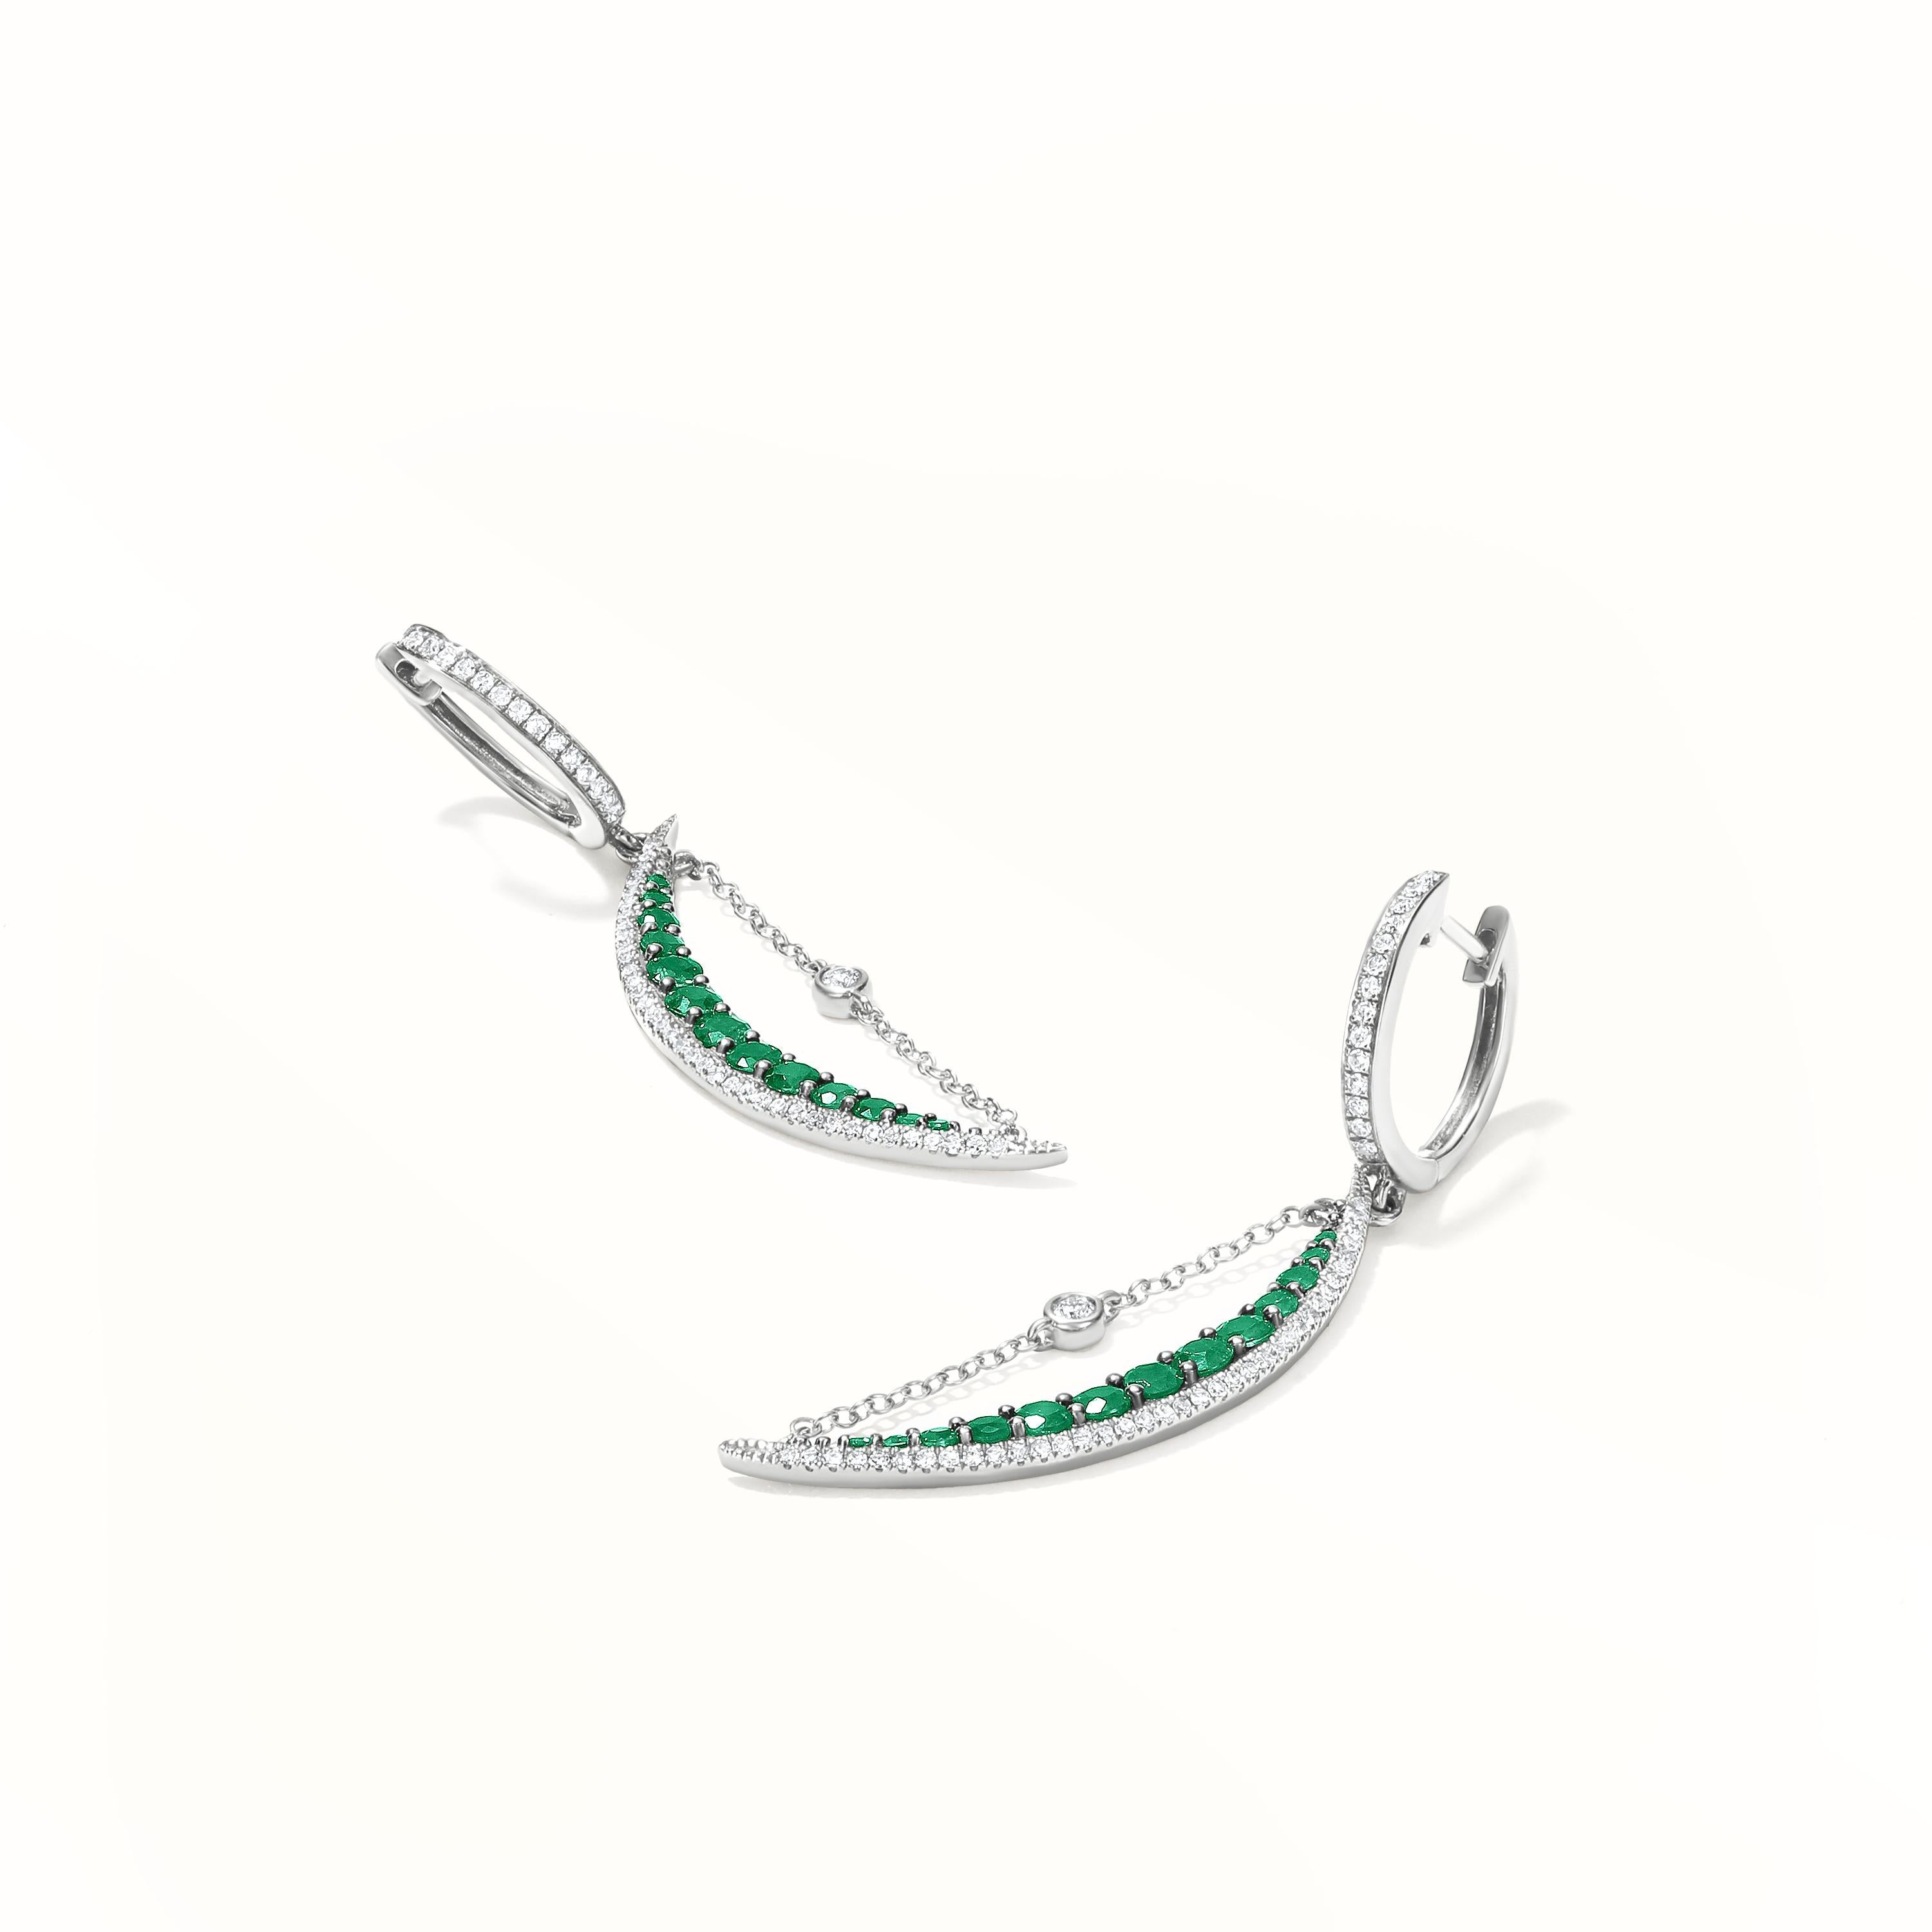 A stunning pair of Gemistry half-moon-shaped earrings with 26 round faceted brilliant Emerald set in pave. The piece is made of 14 karat white gold and is encrusted with 104 round single-cut diamonds. Earrings with hugger clasps that lock into place